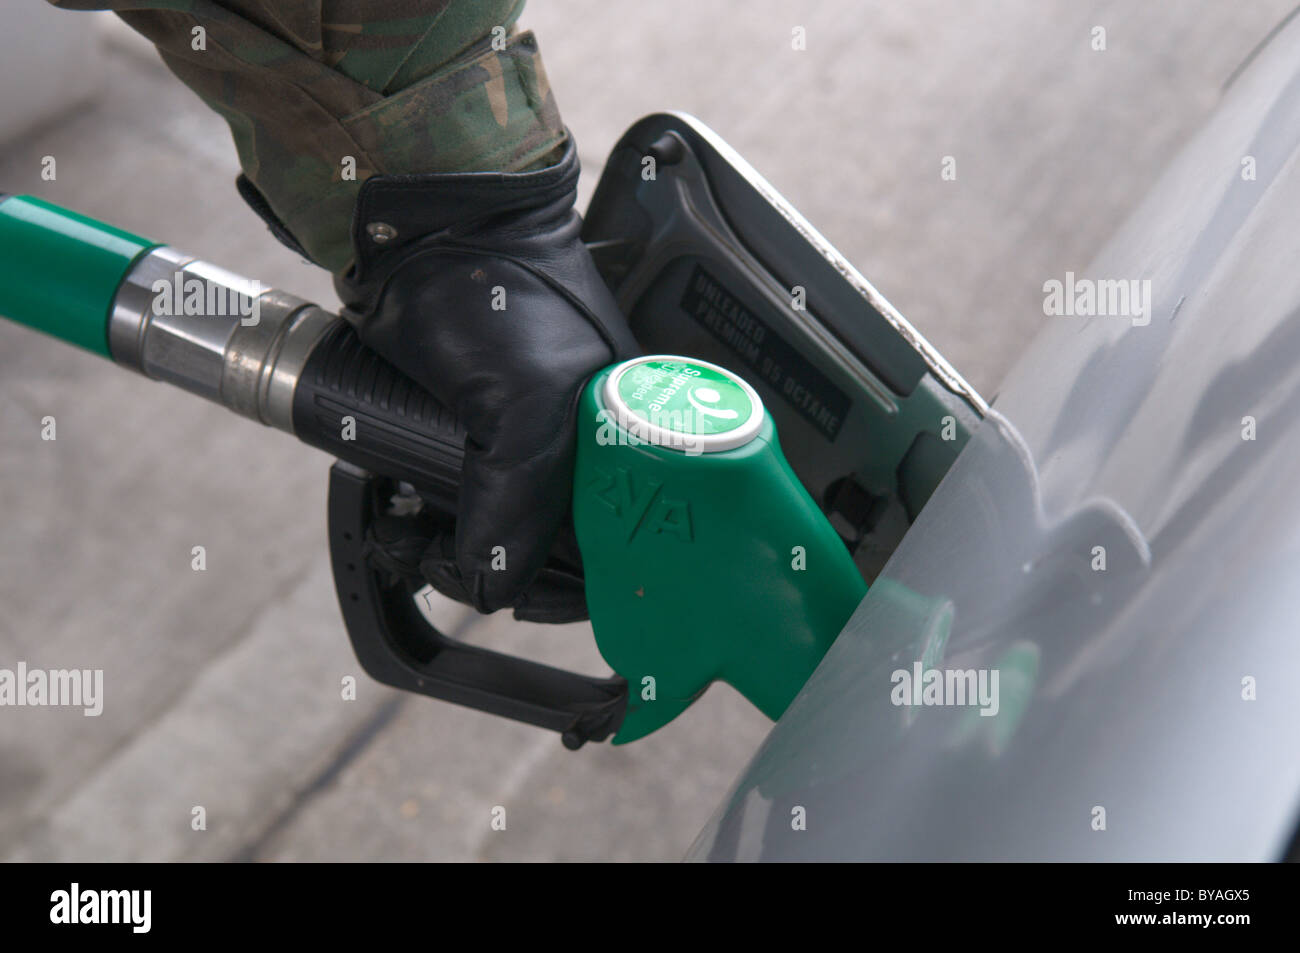 Filling car with fuel. Stock Photo